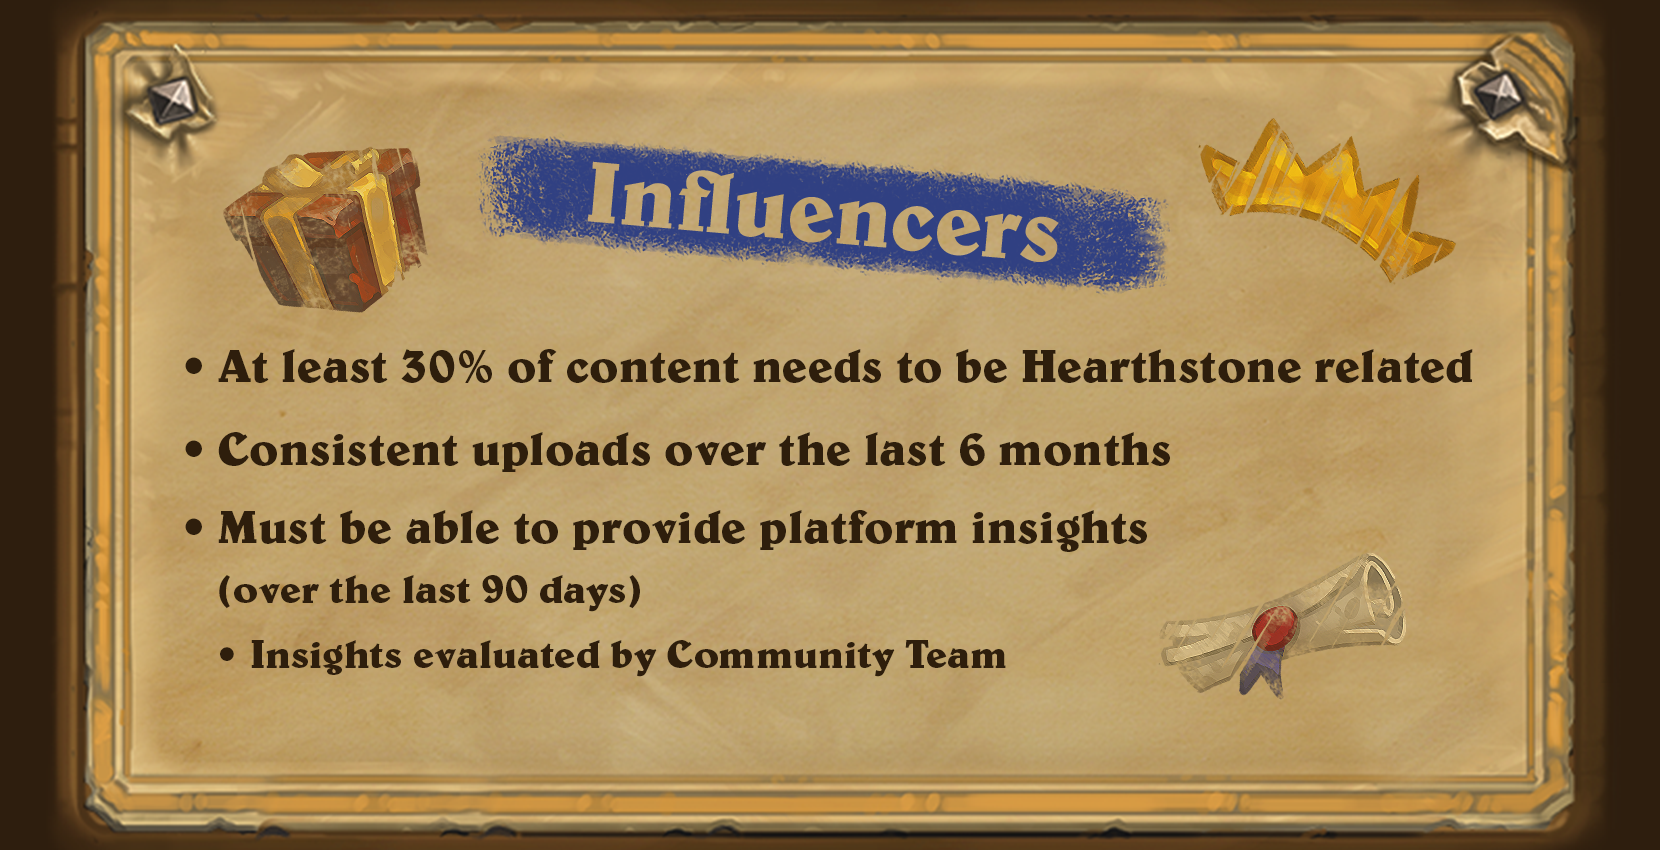 At least 30% of content needs to be Hearthstone related. Consistent uploads over the last 6 months (not Hearthstone related). Must be able to provide platform insights (over the last 90 days).